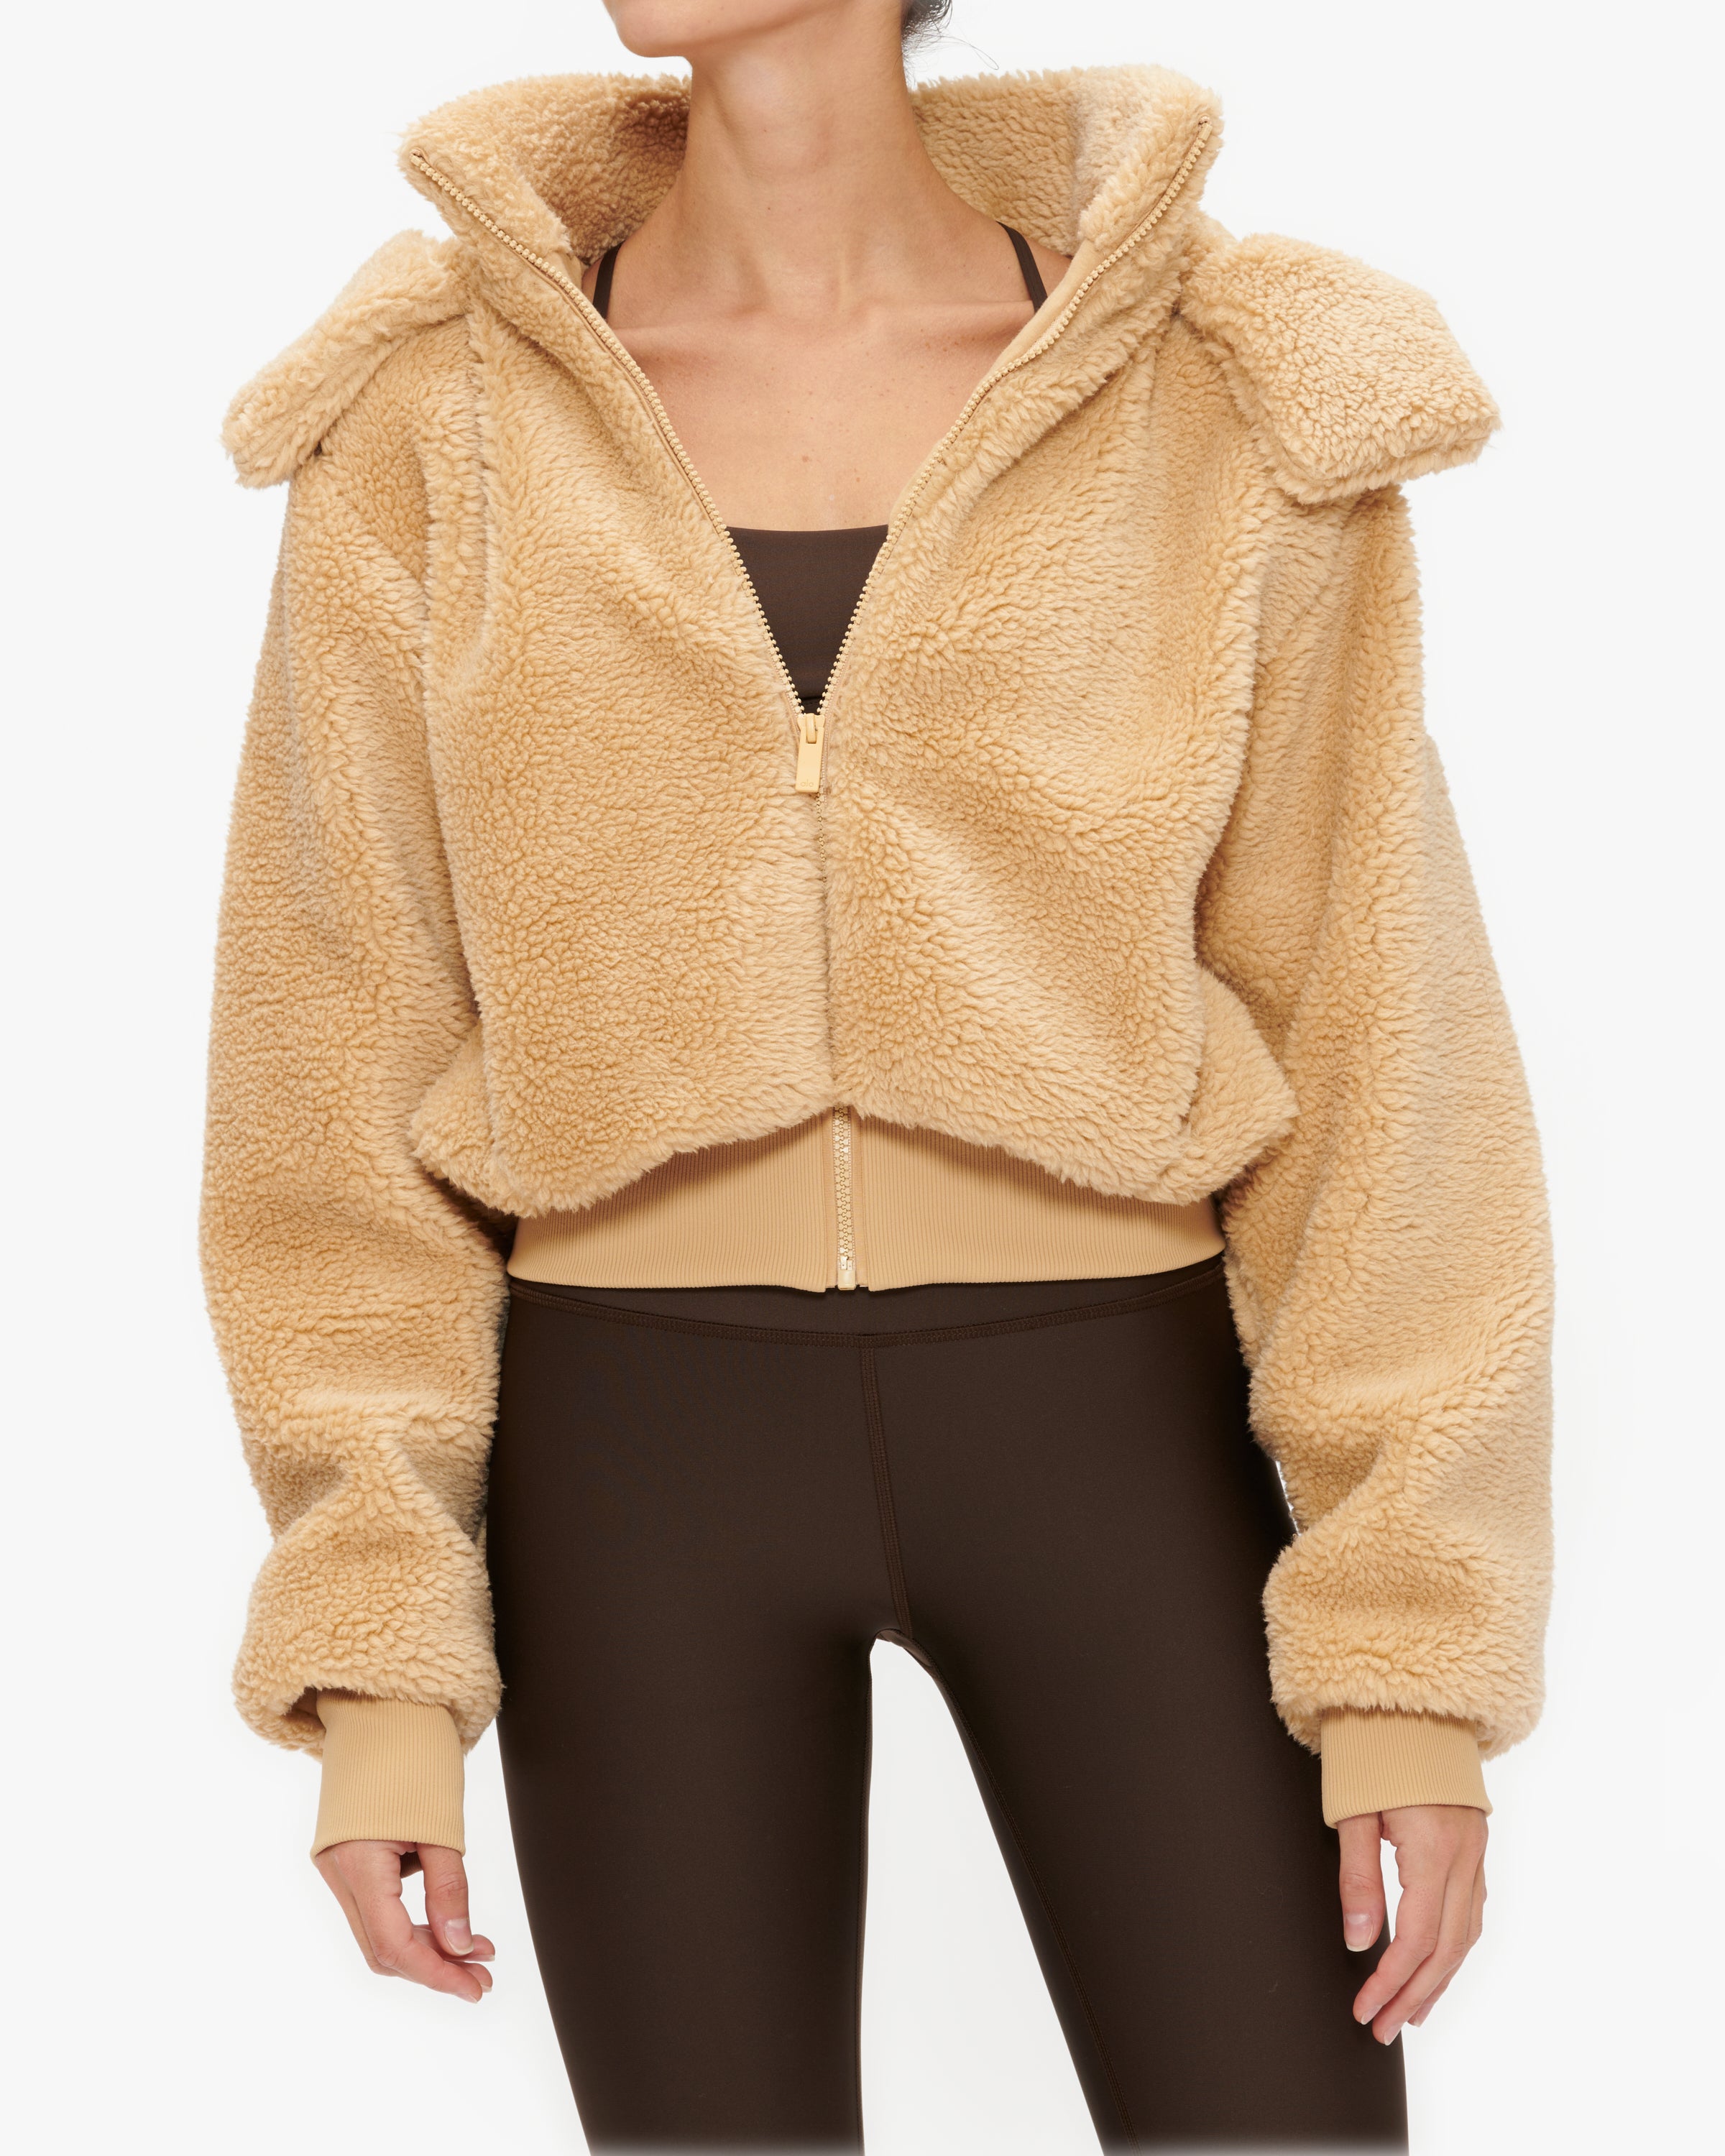 Cozy up in the Alo Yoga Flurry Sherpa Jacket